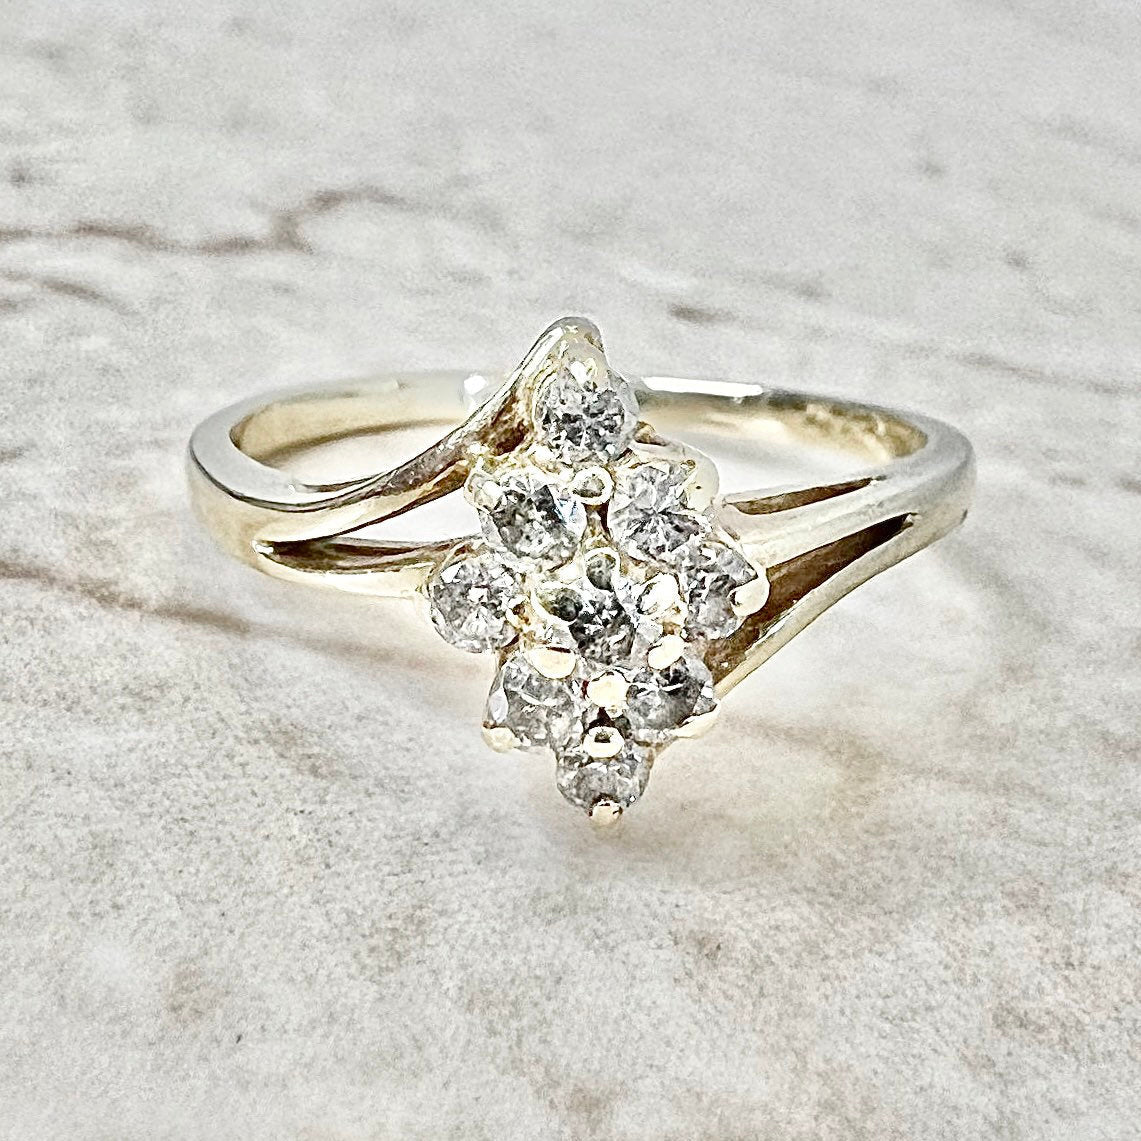 Vintage 14K Diamond Cluster Ring - Yellow Gold Diamond Cocktail Ring - Anniversary Ring - Bypass Ring - Birthday Gift - Best Gifts For Her